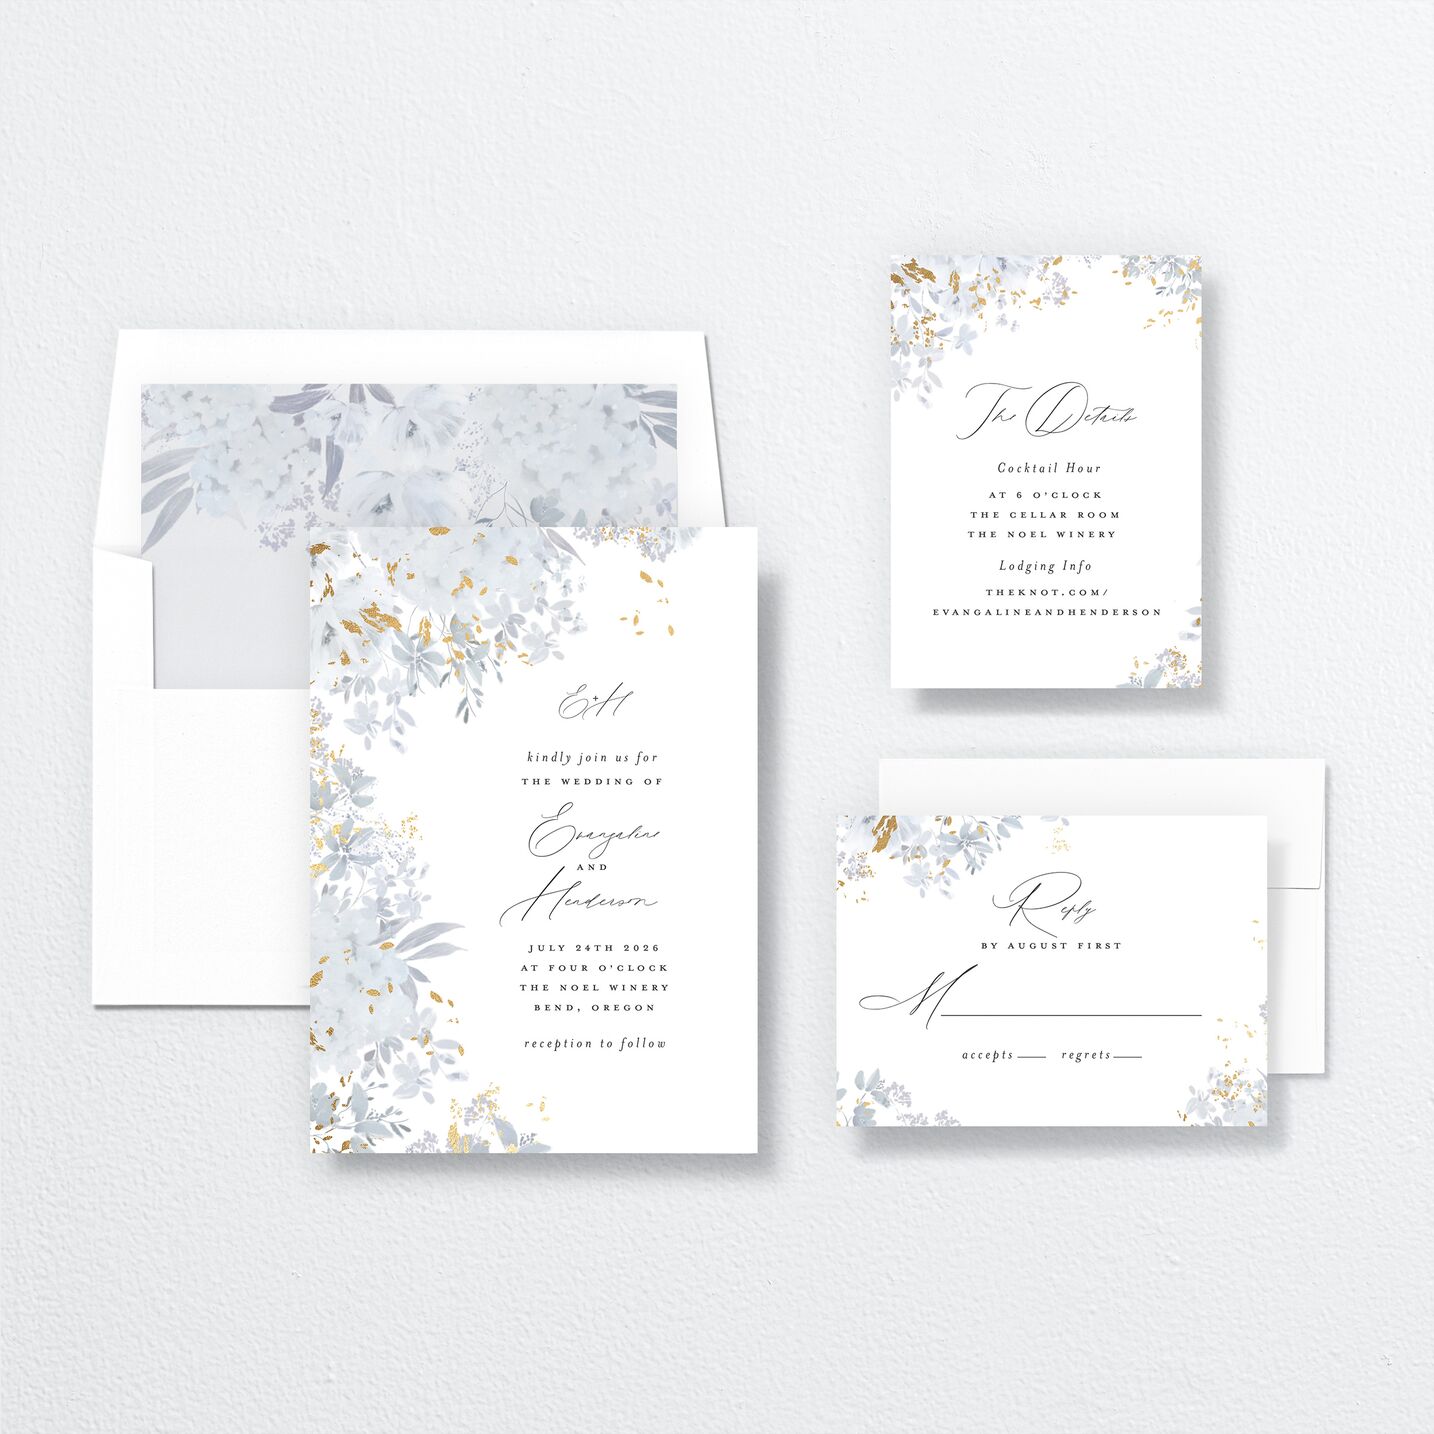 Monochrome Blooms Wedding Invitations suite in blue